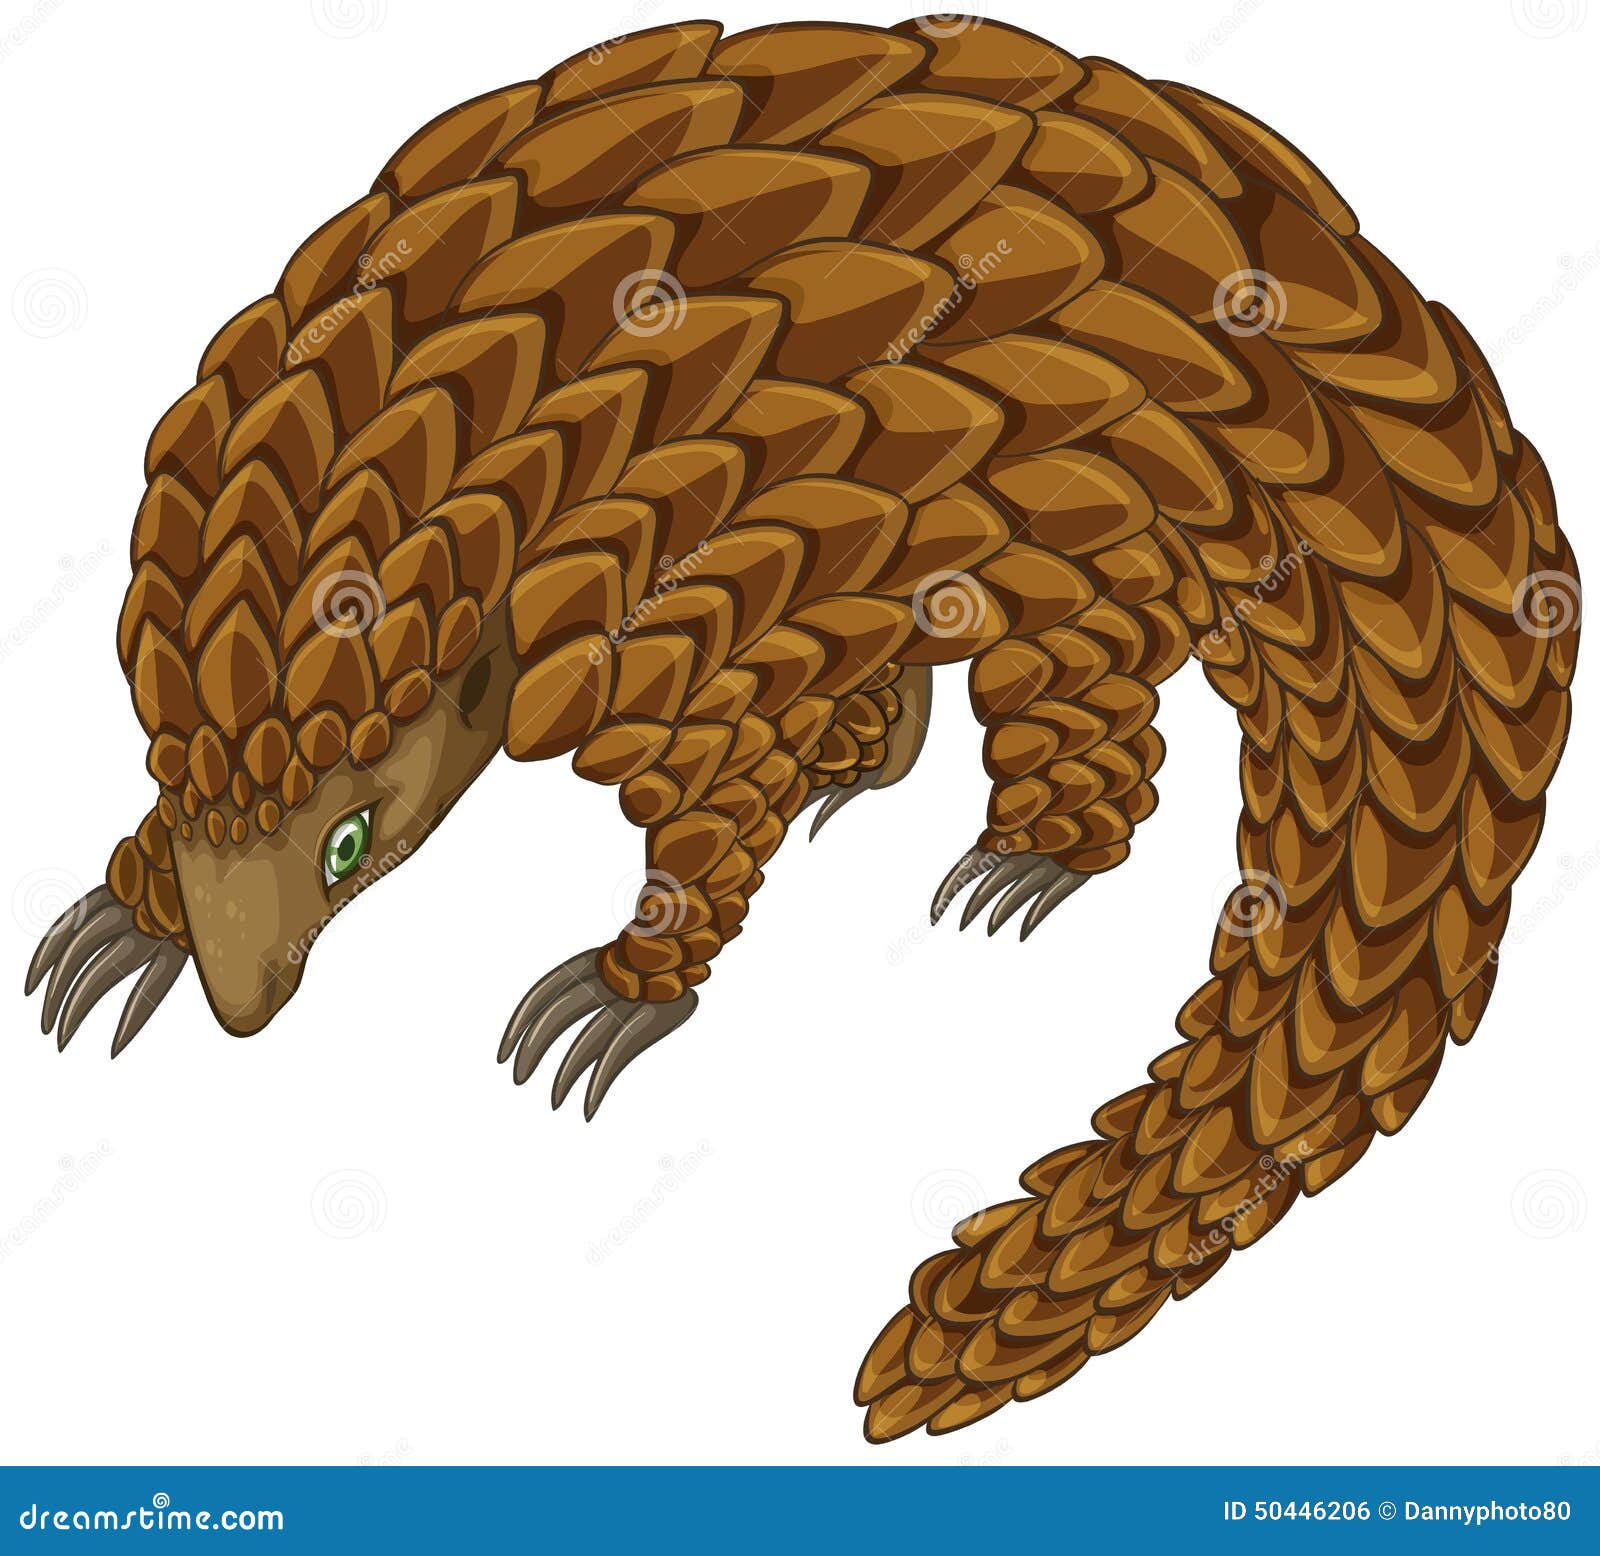 Pangolin Cartoons, Illustrations & Vector Stock Images - 440 Pictures to download from ...1300 x 1281